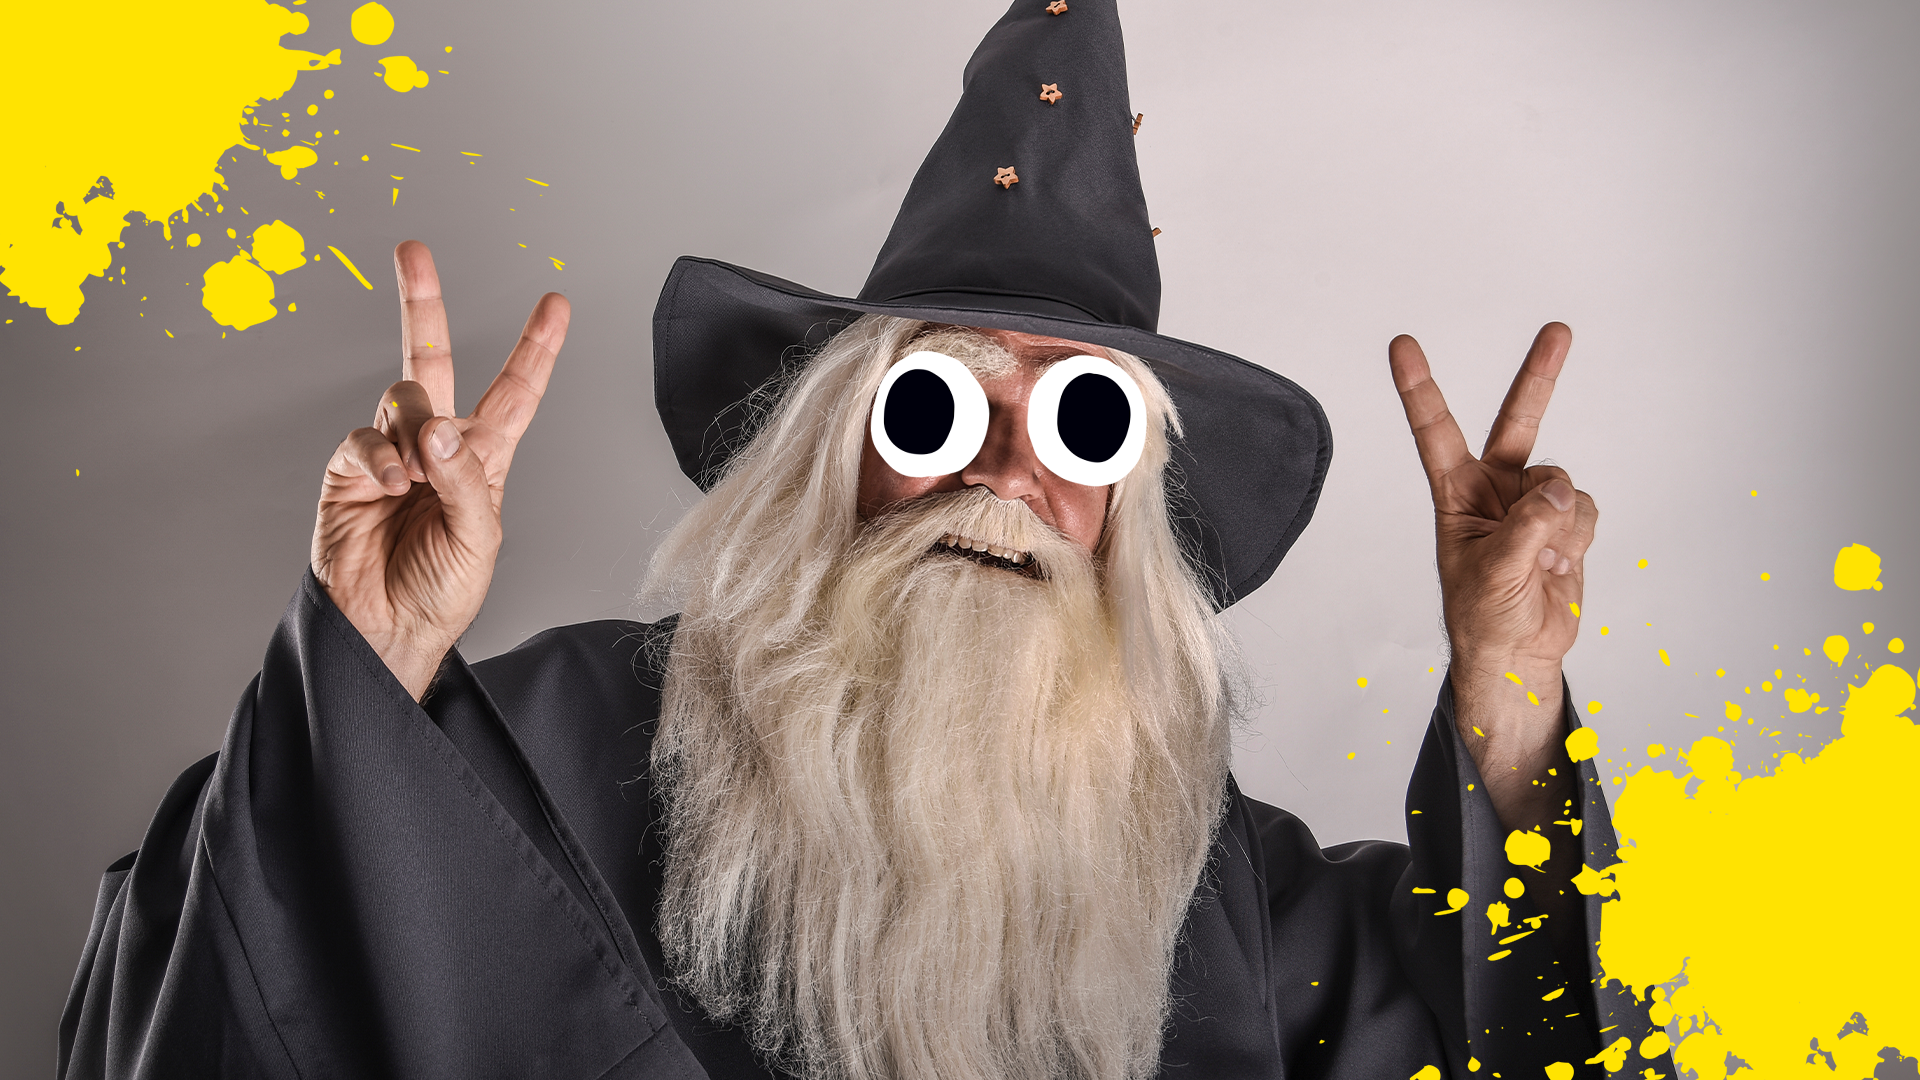 Cool wizard doing peace signs and splats